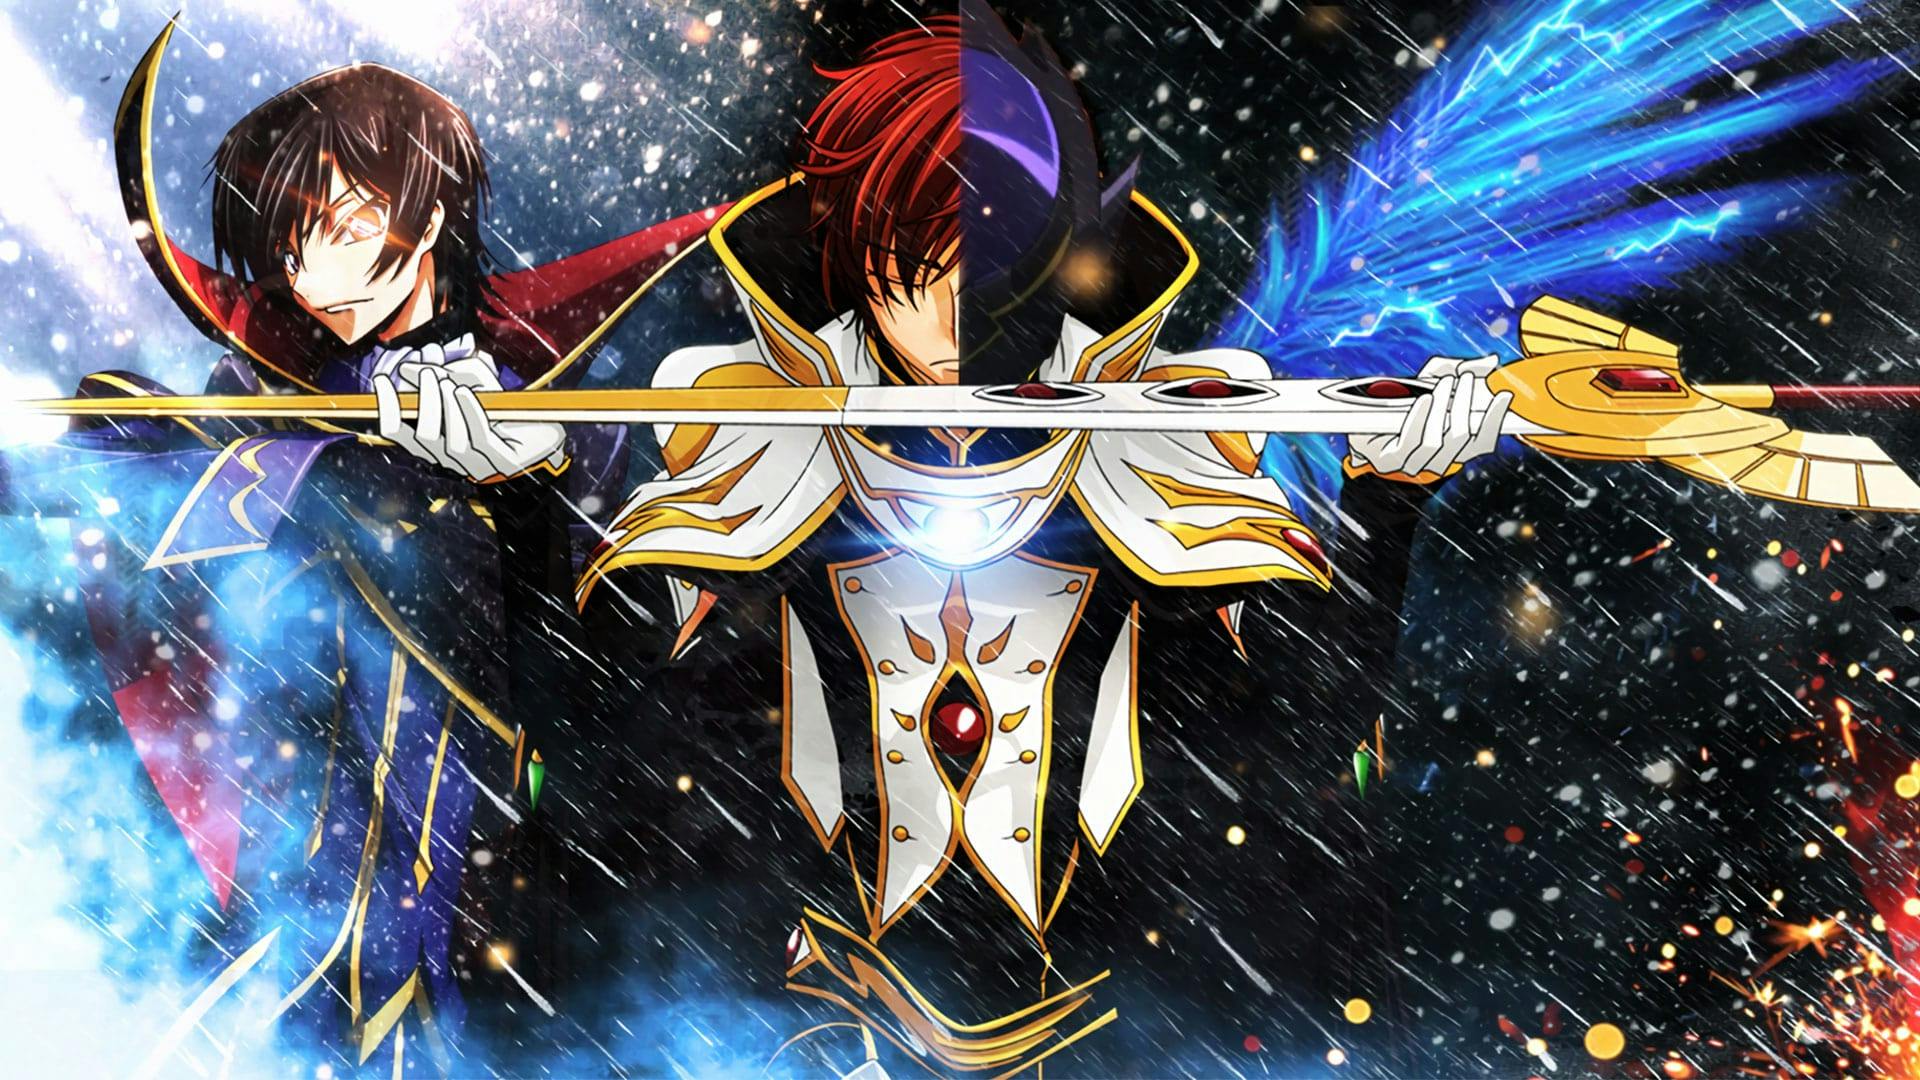 Code Geass: Lelouch of the Rebellion background image